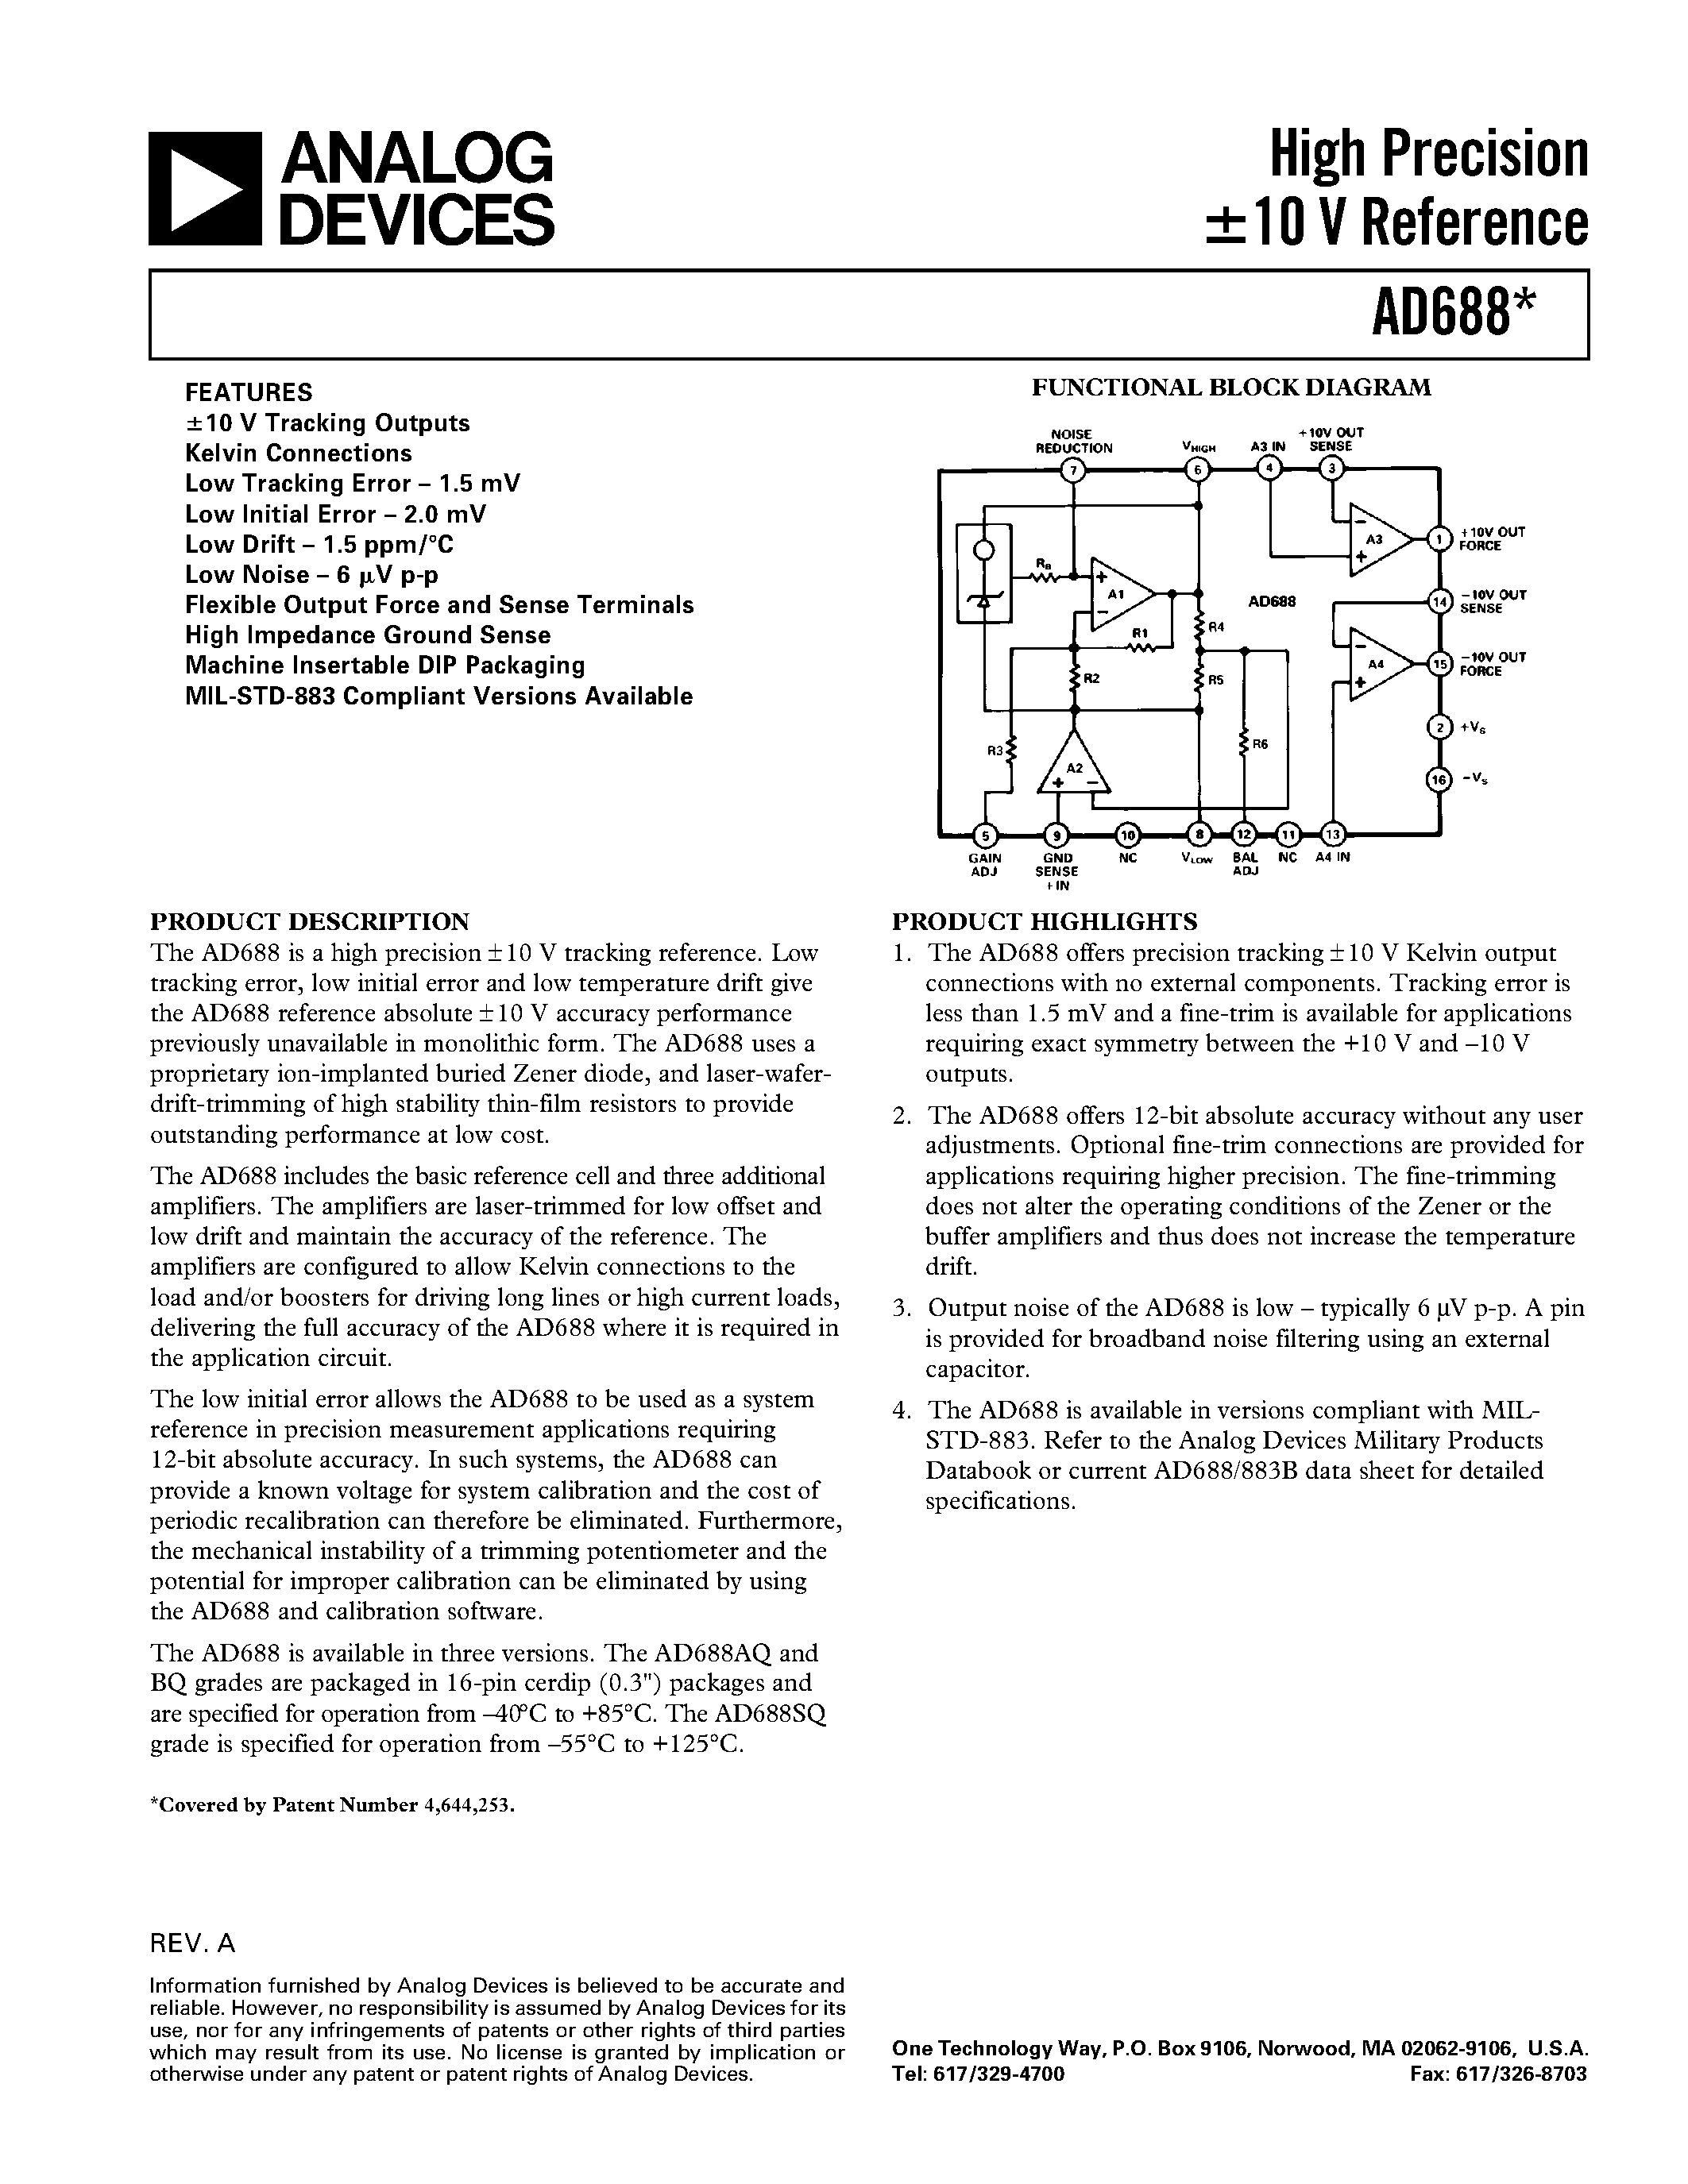 Datasheet AD688SQ - High Precision +-10 V Reference page 1